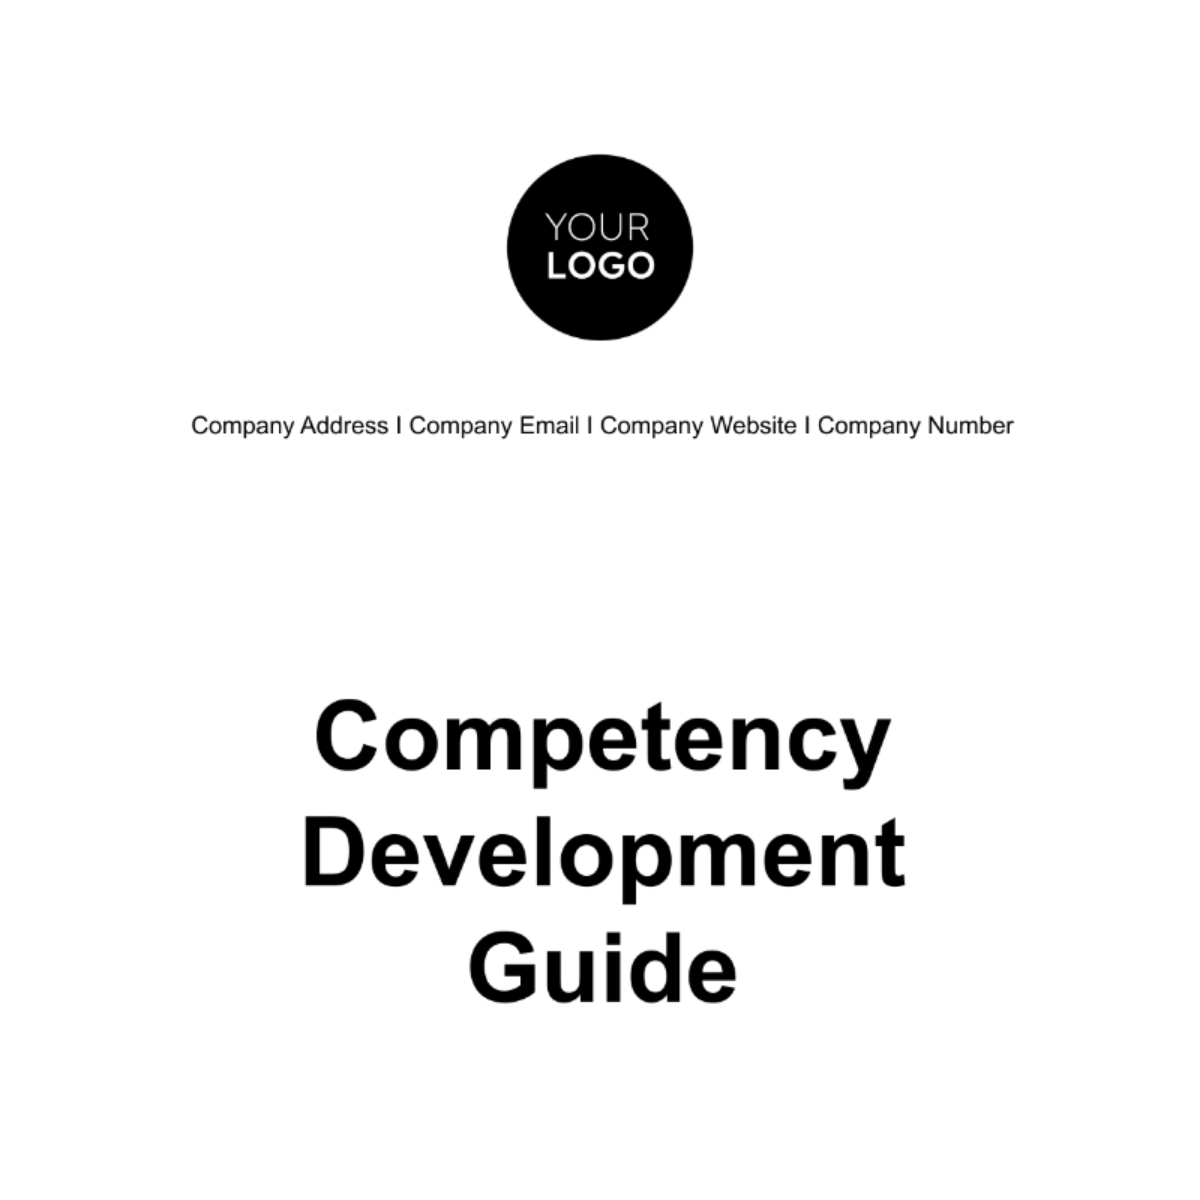 Free Competency Development Guide HR Template